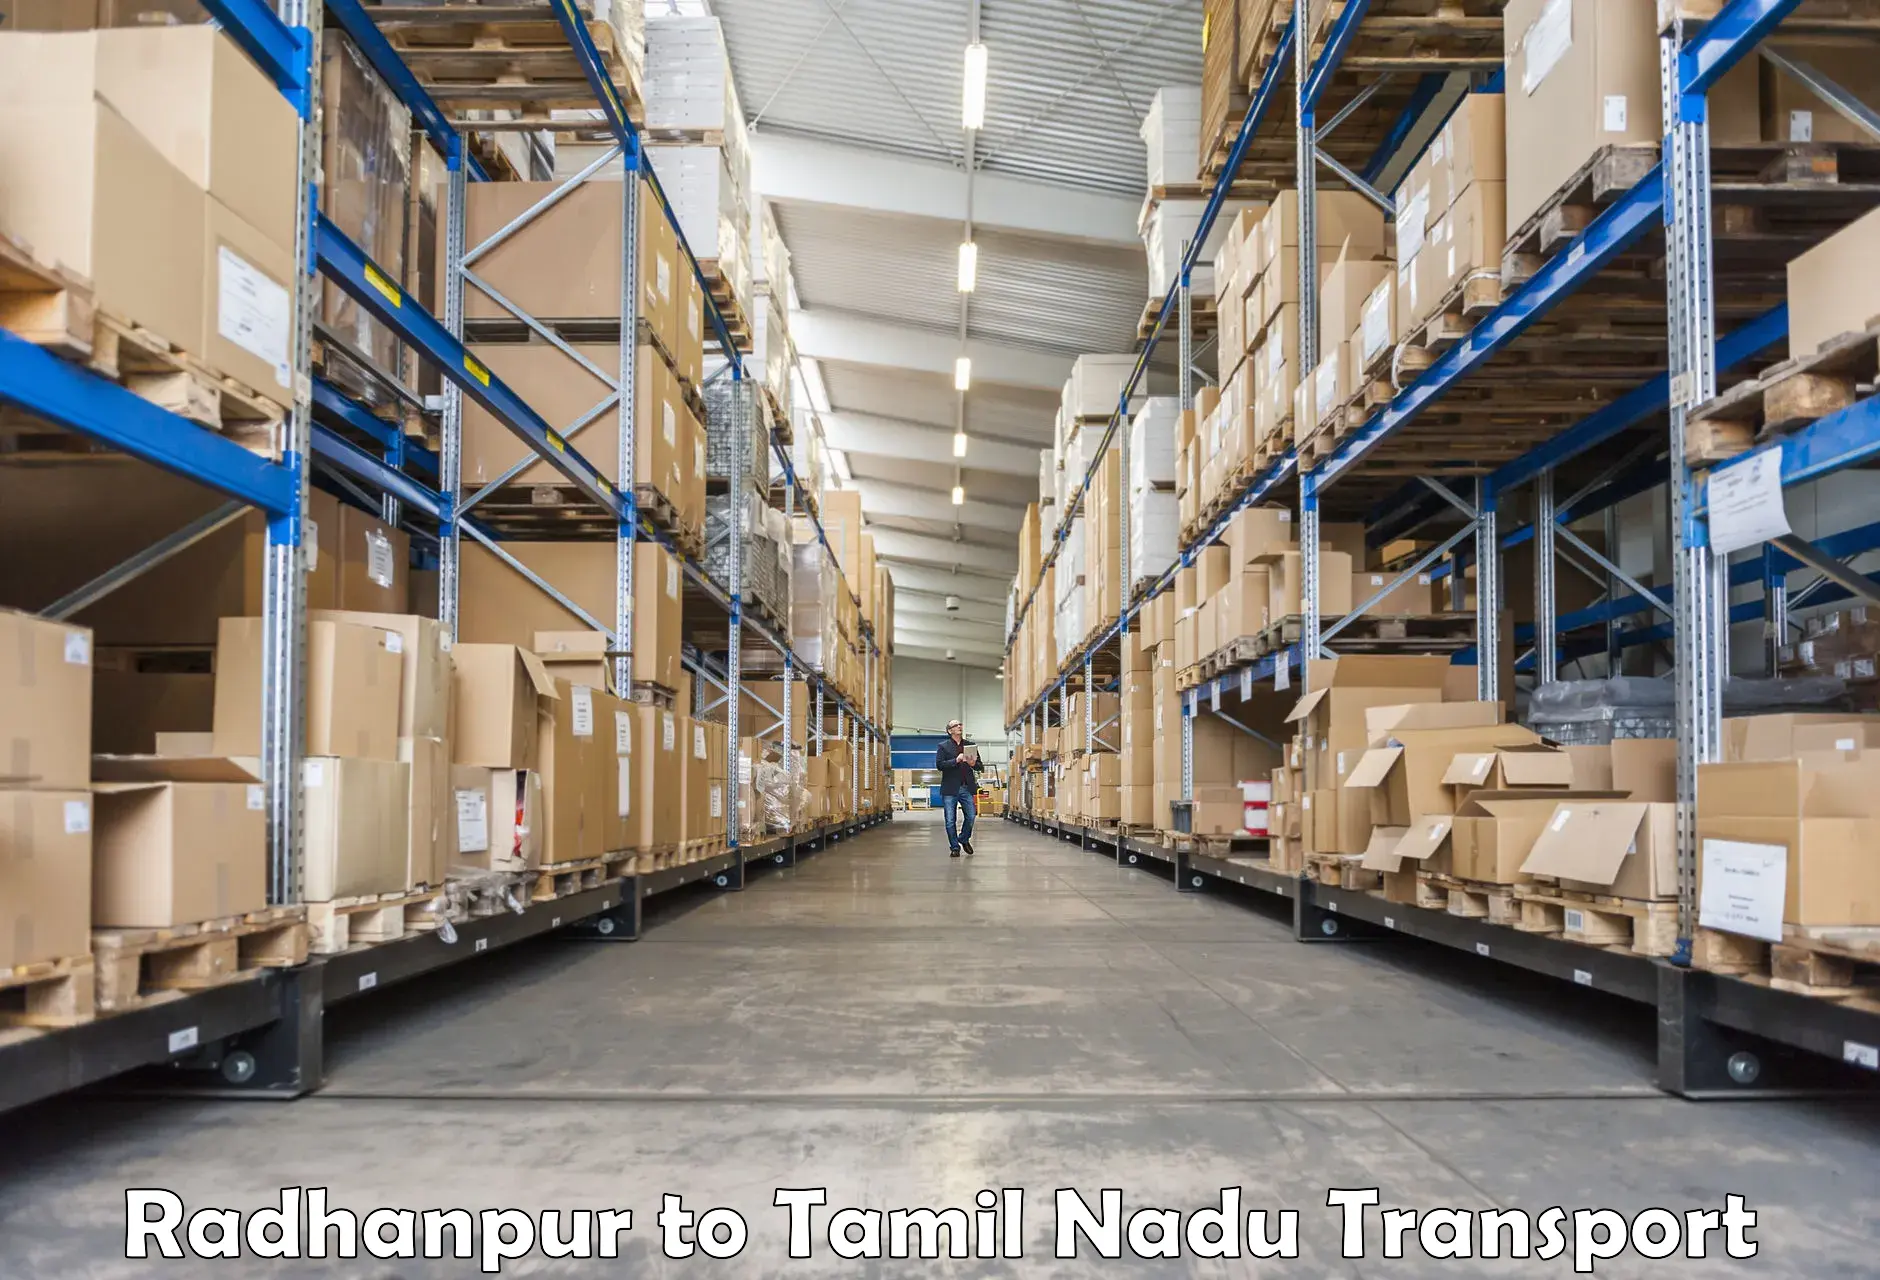 Parcel transport services Radhanpur to Dindigul